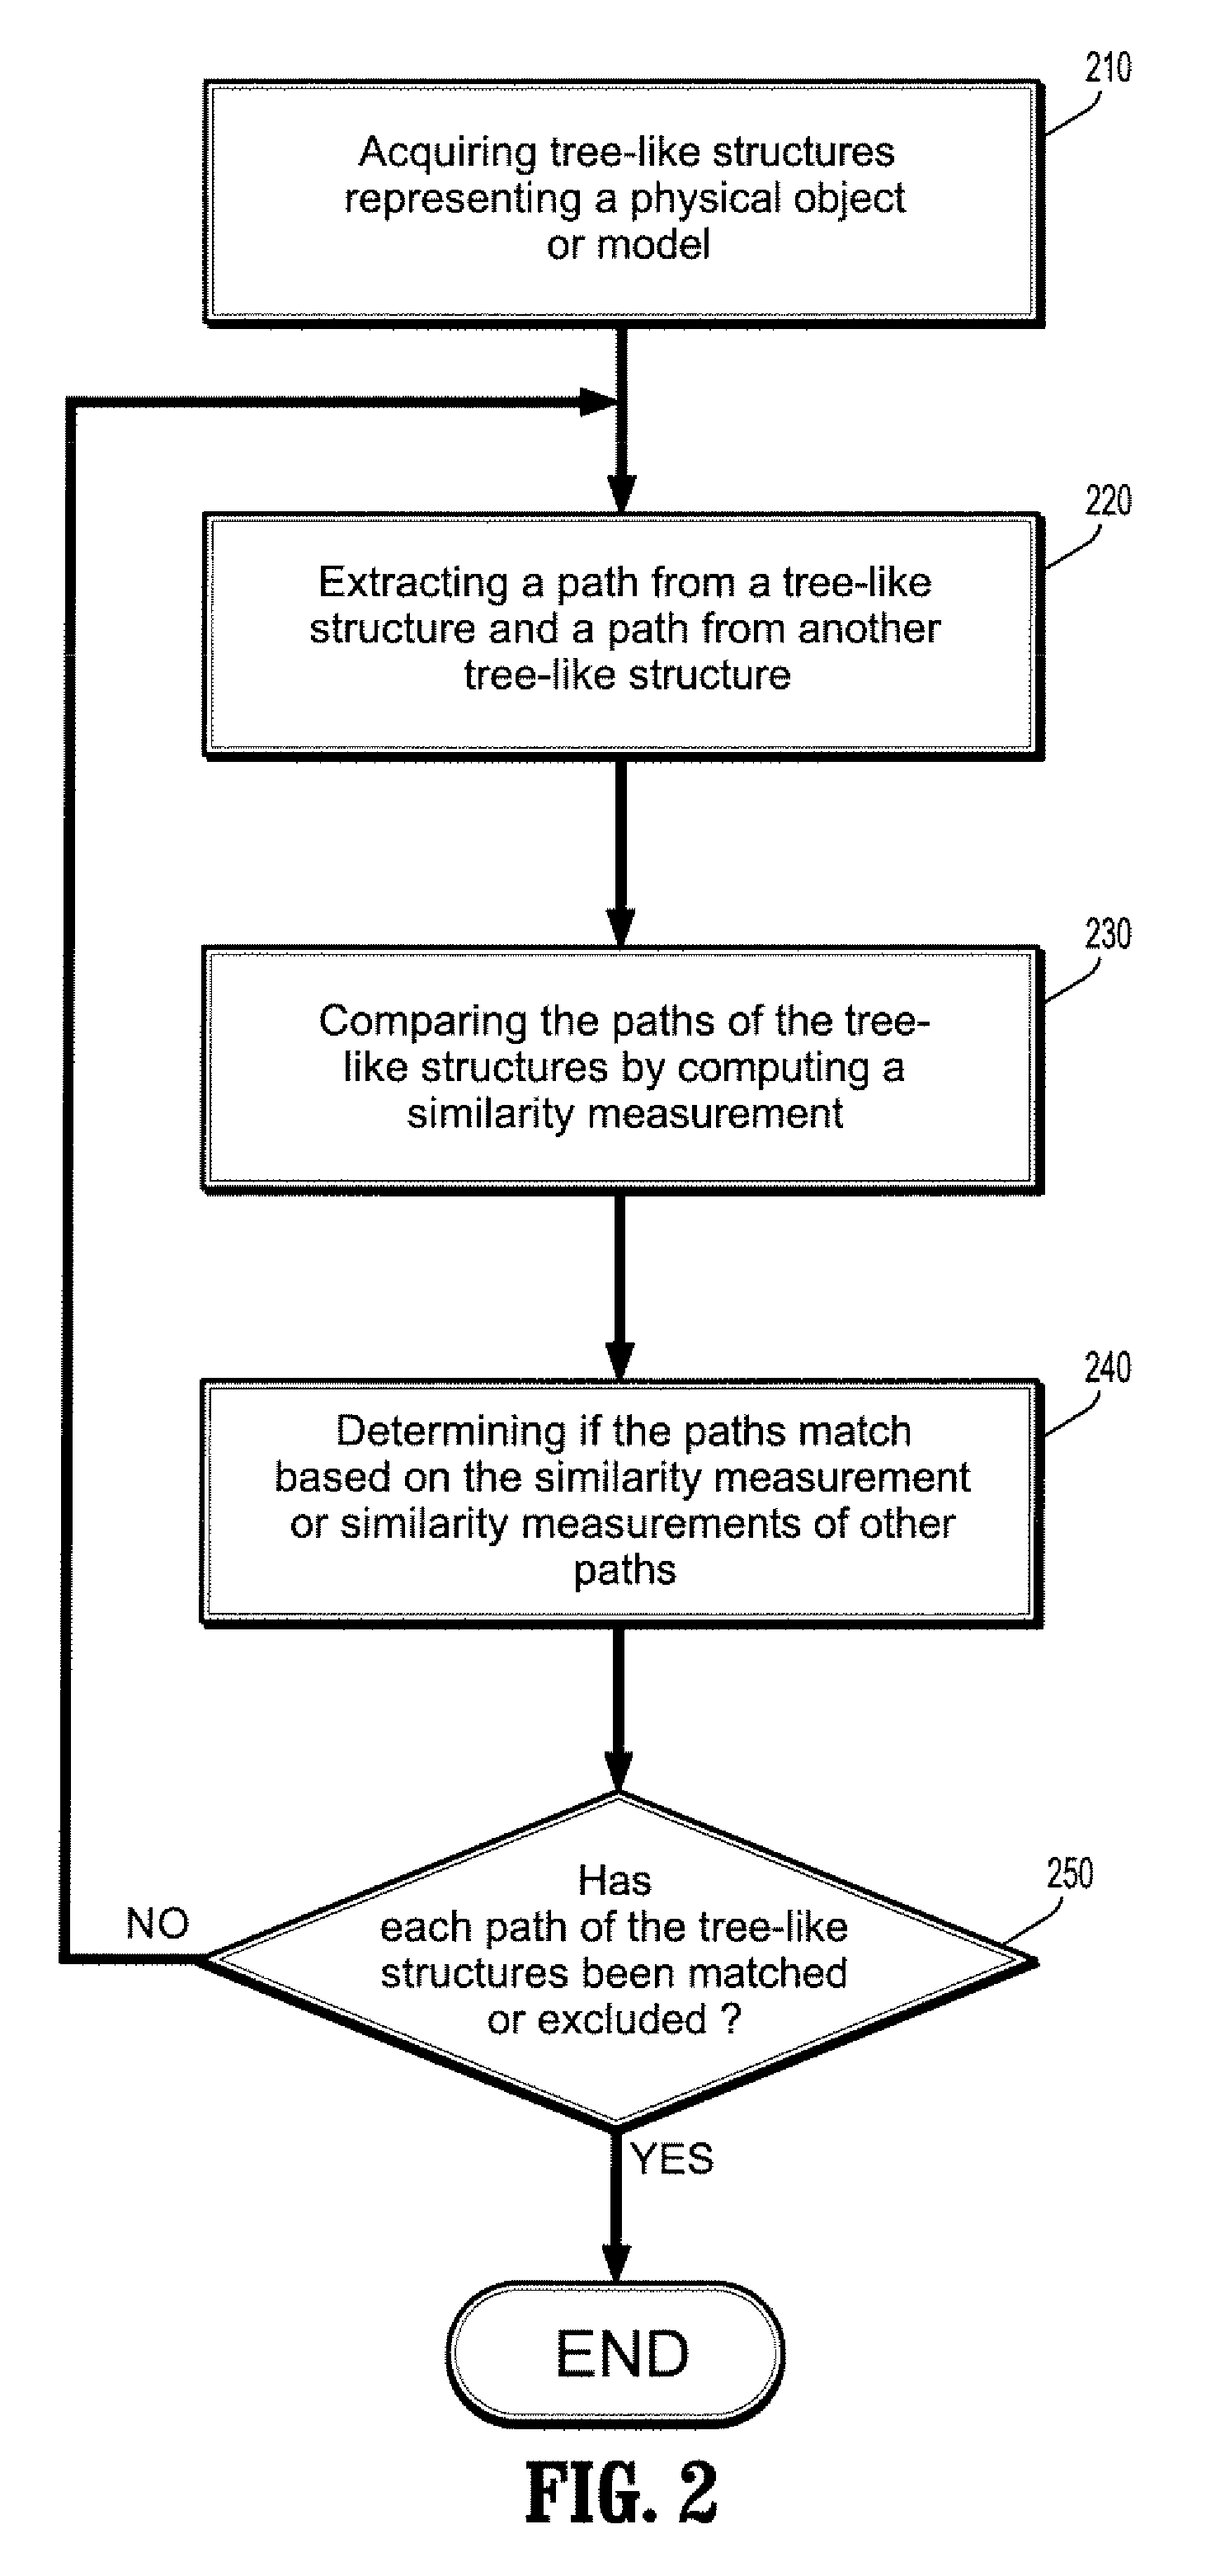 System and method for path based tree matching